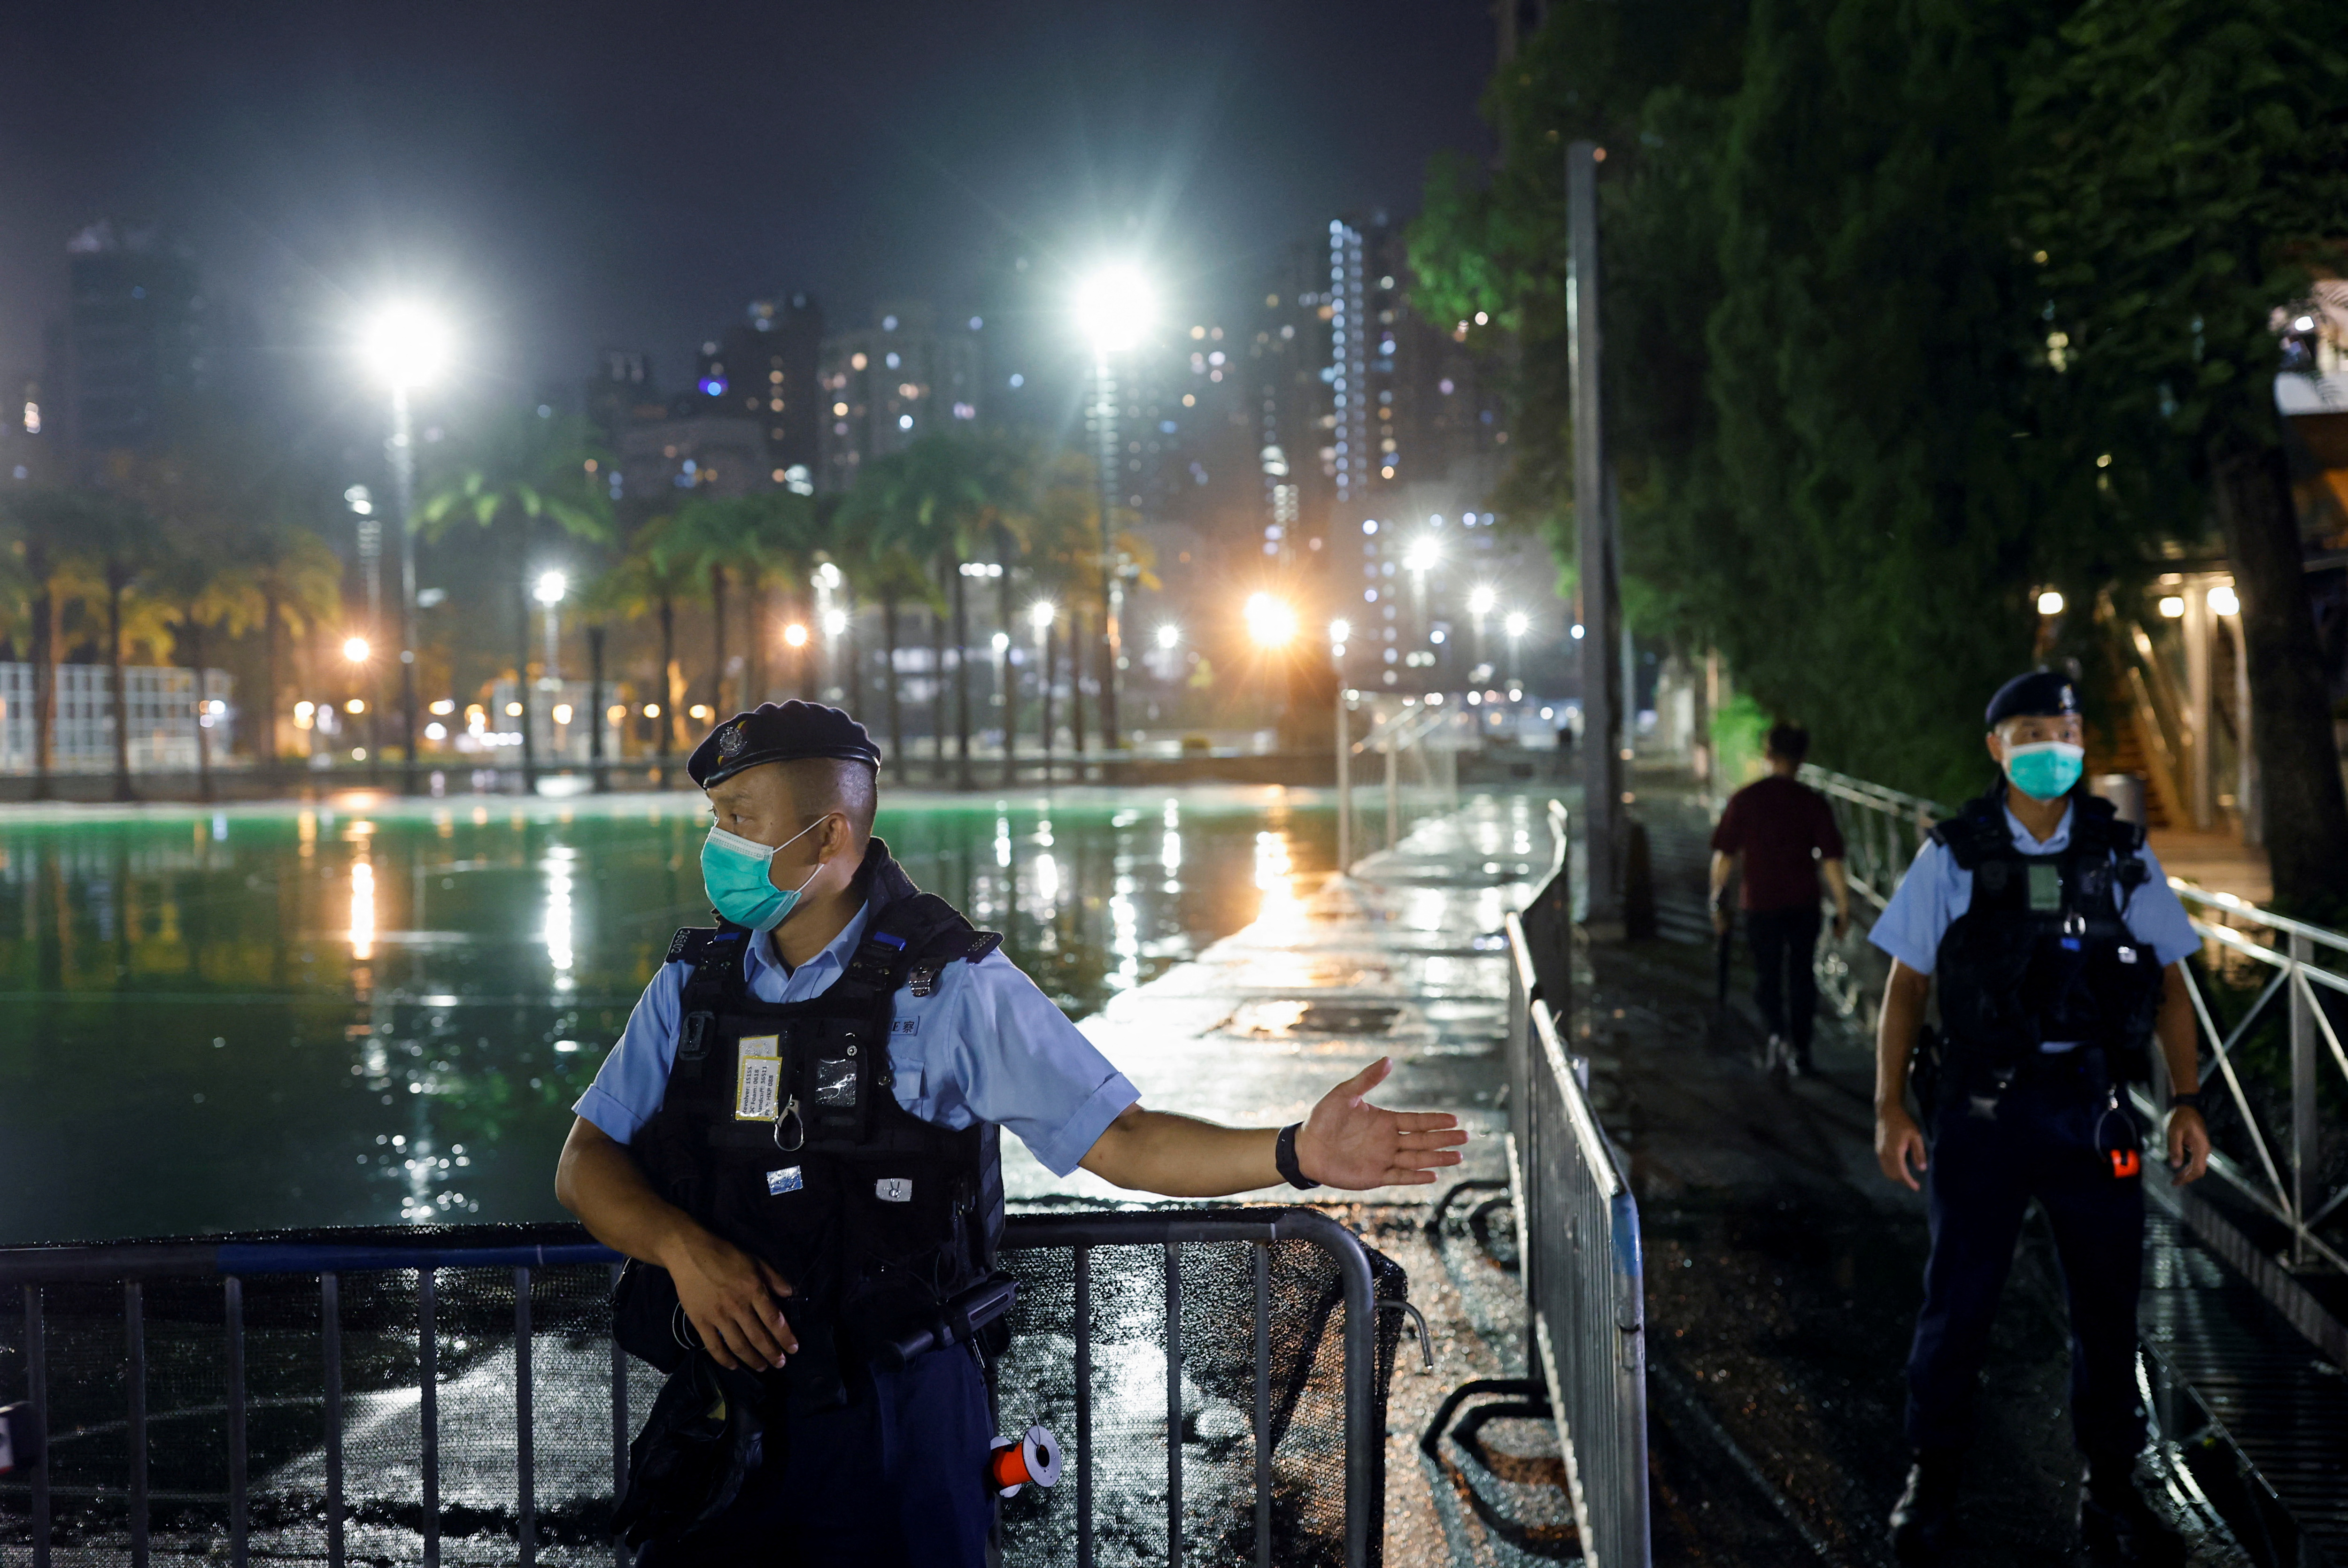 A police officer asks people to leave after announcing a closure of a part of Victoria Park, ahead of Tiananmen anniversary, in Hong Kong